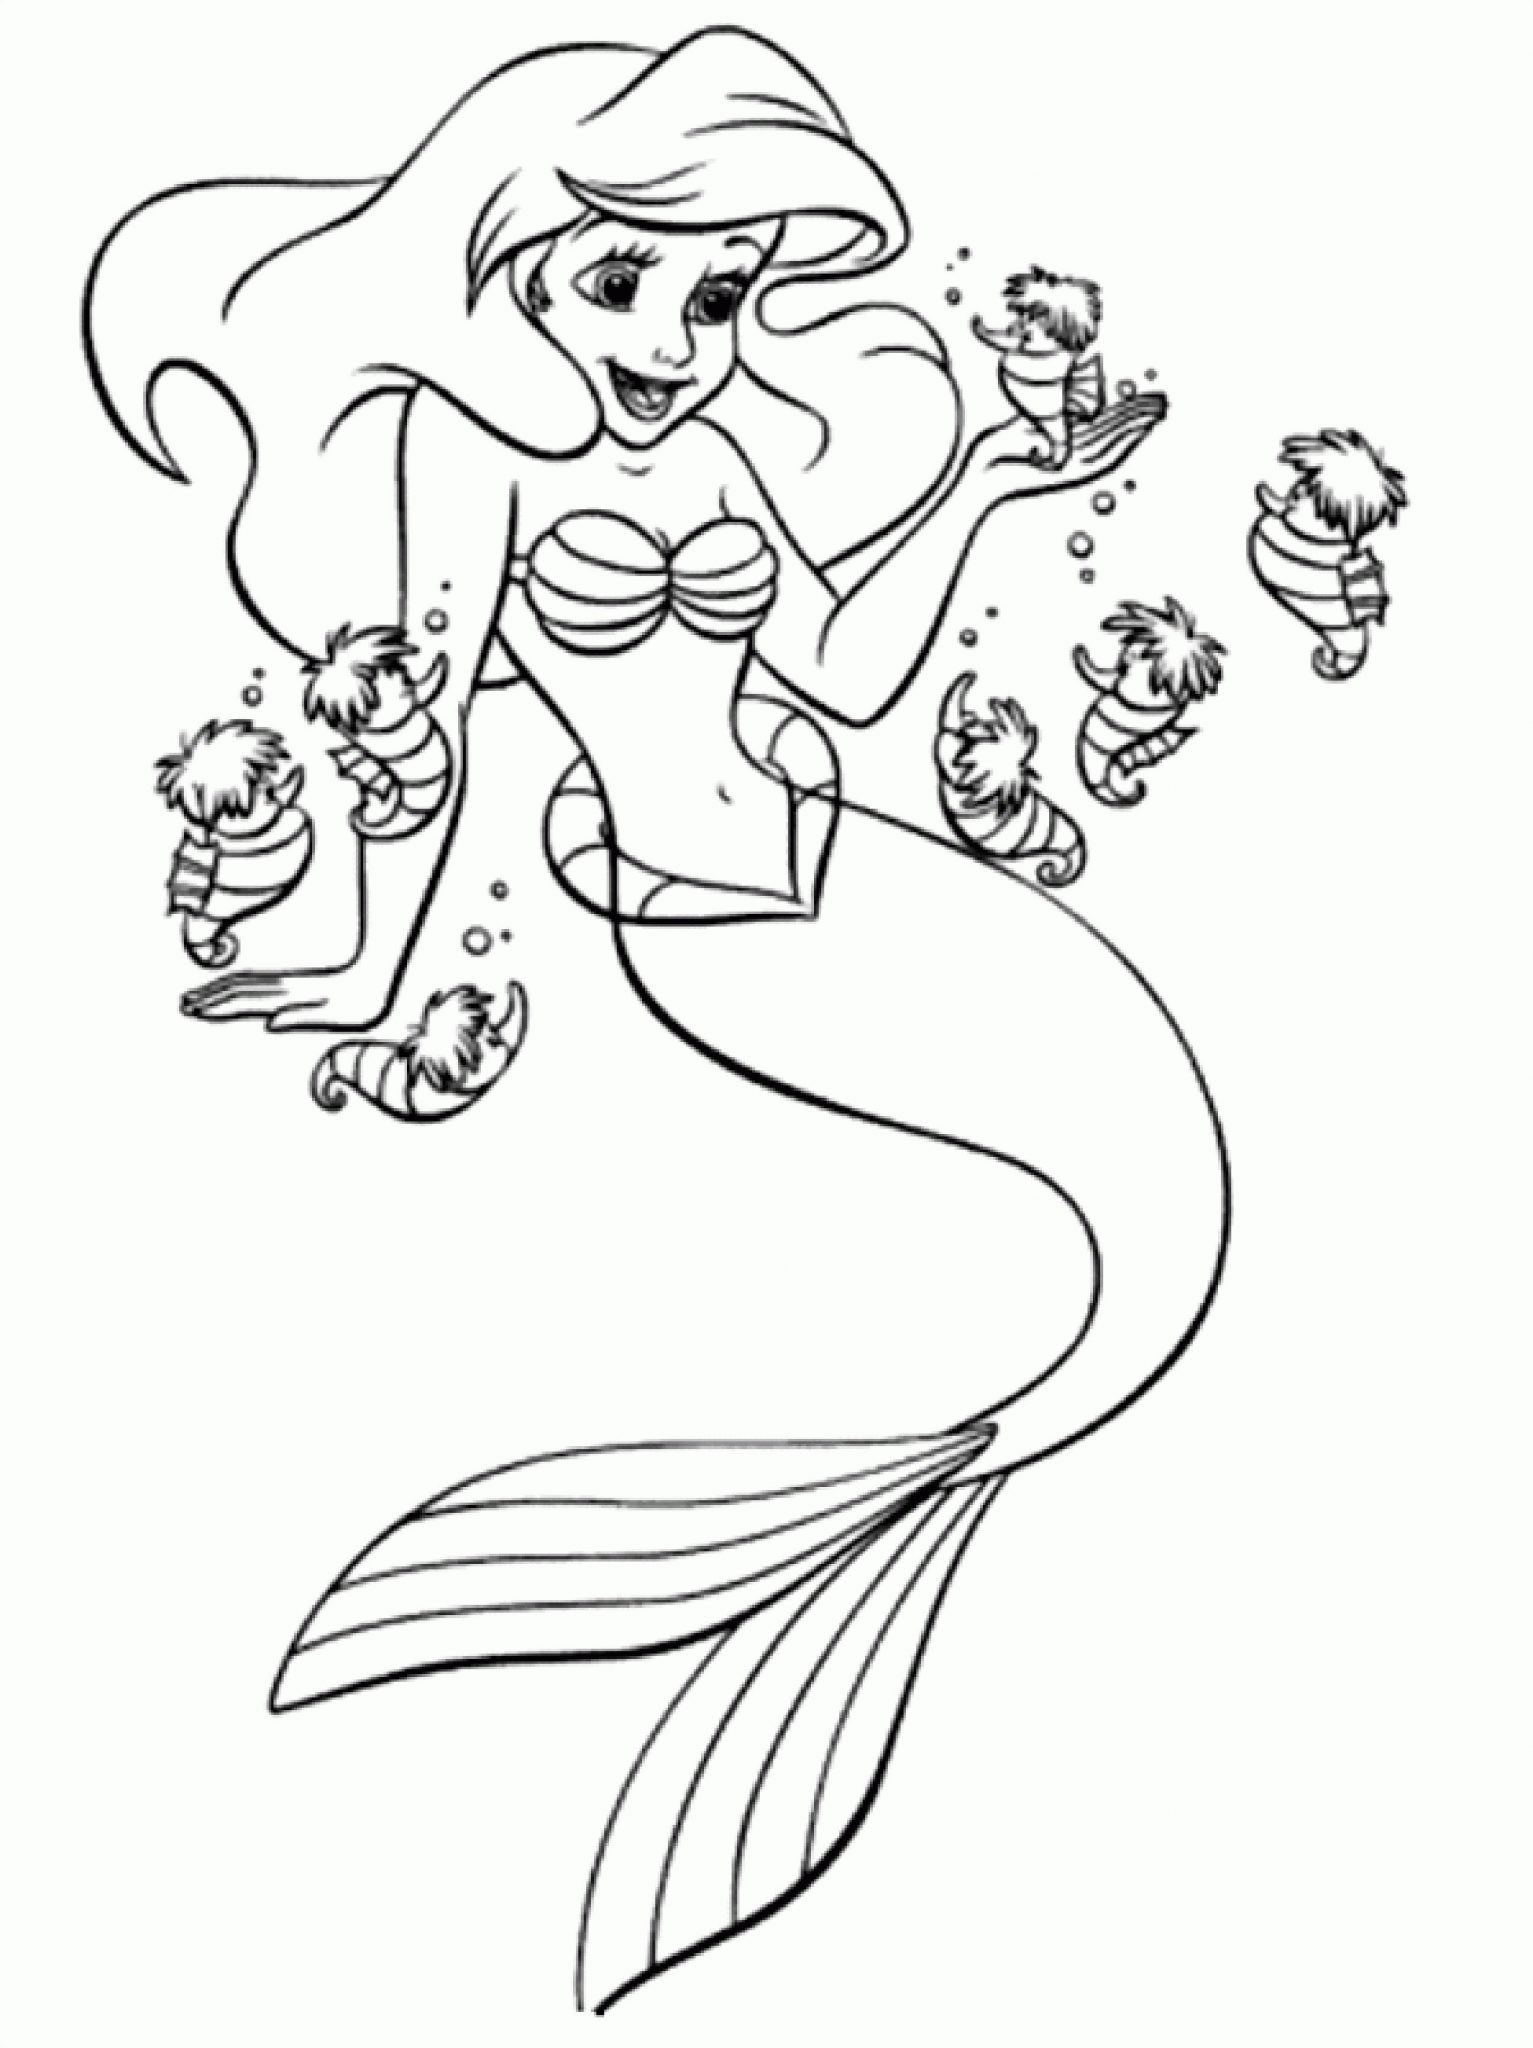 Coloring pages coloring pages for kids beautiful disney coloring pages